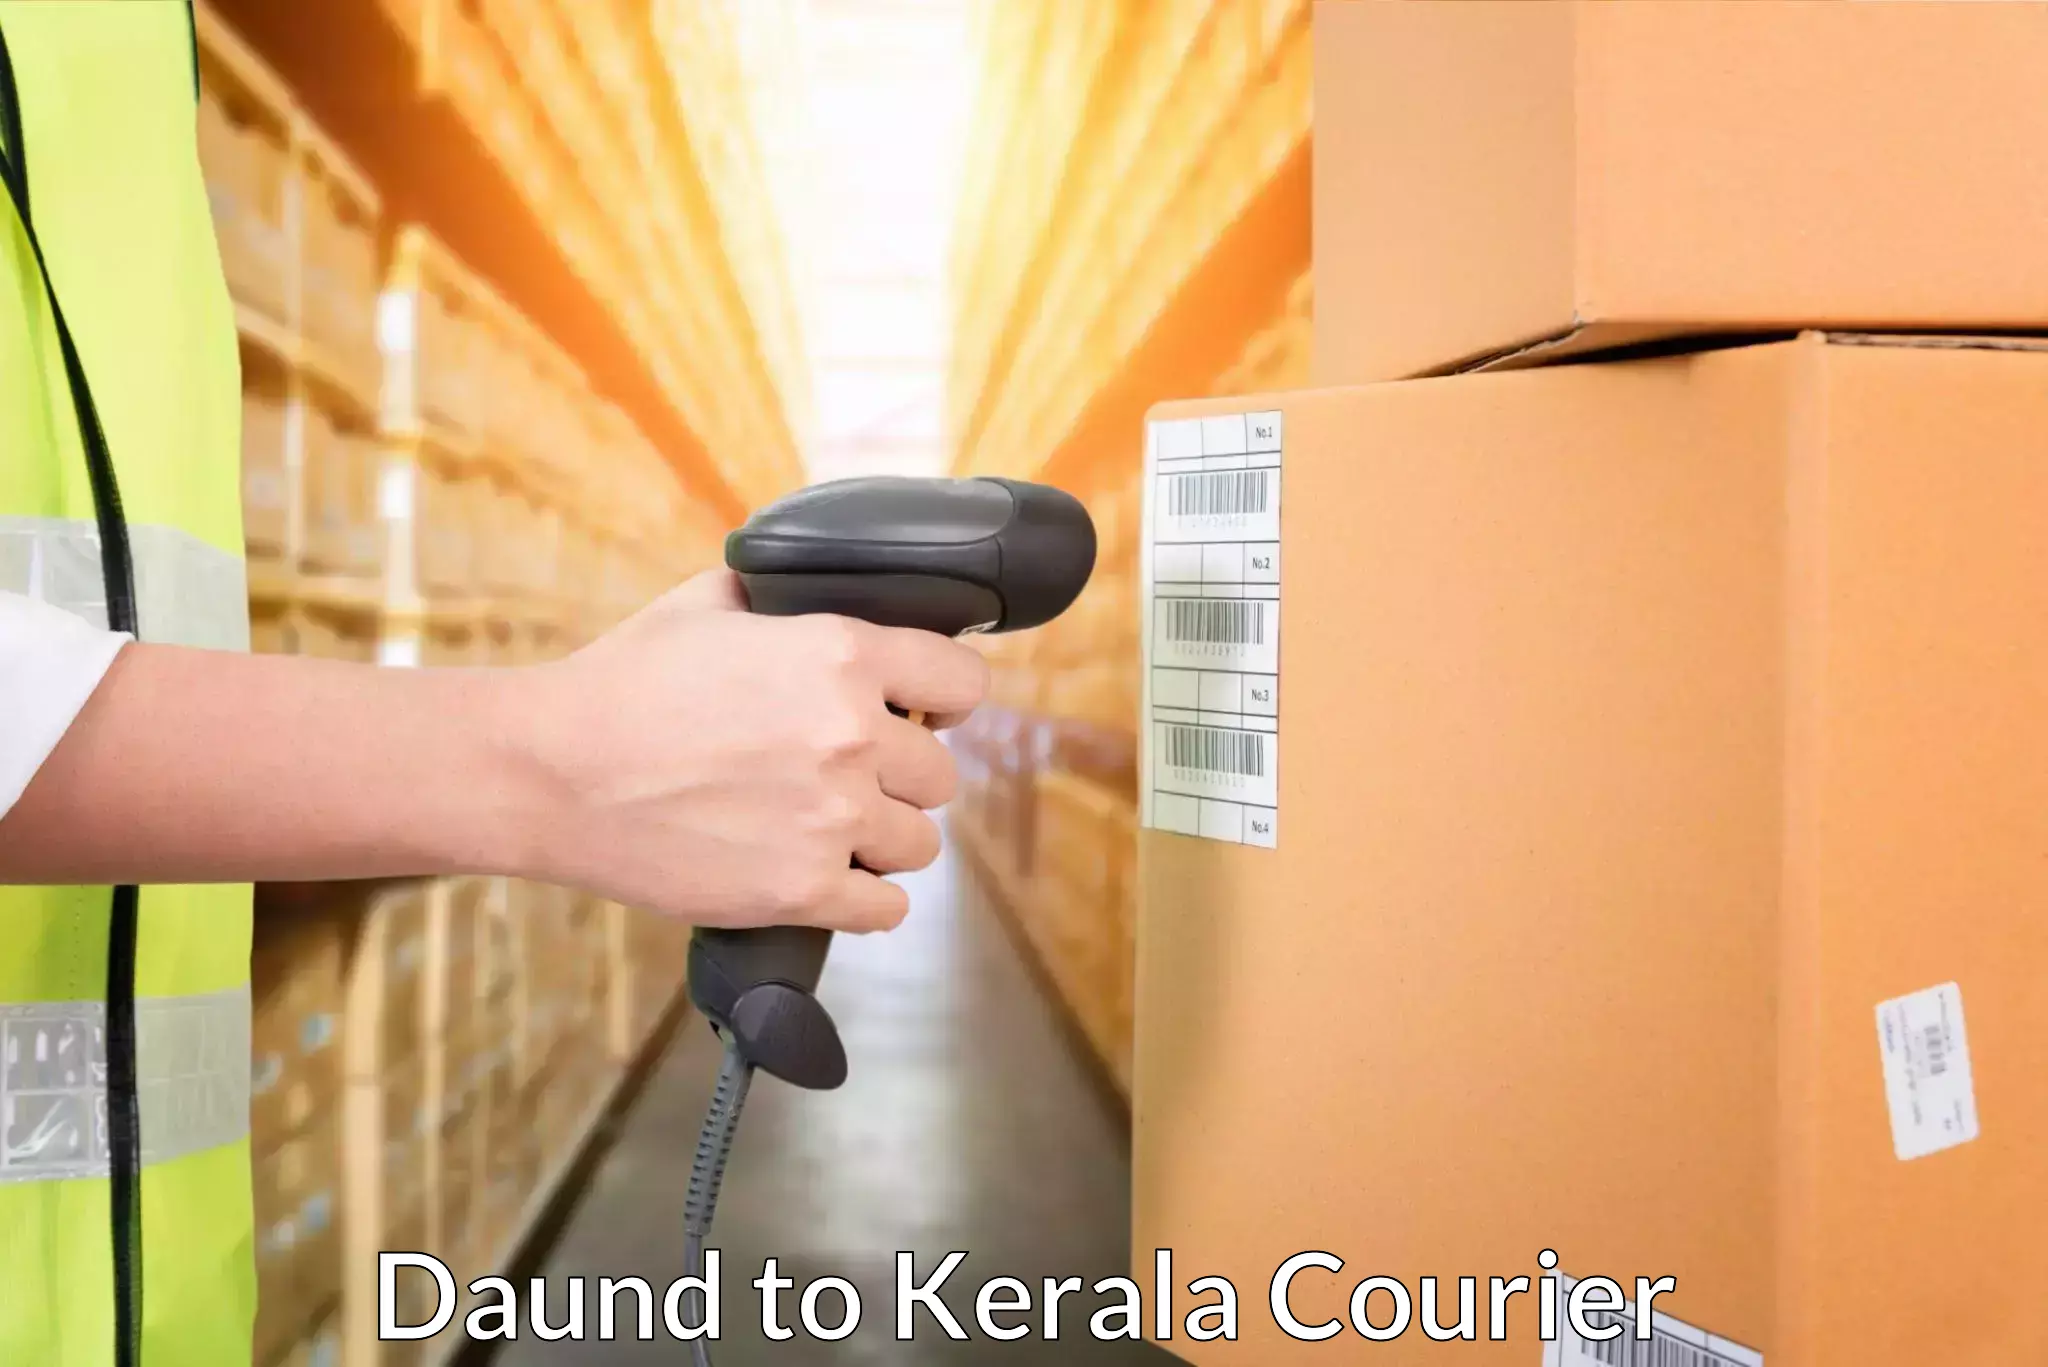 Automated shipping processes Daund to Kerala